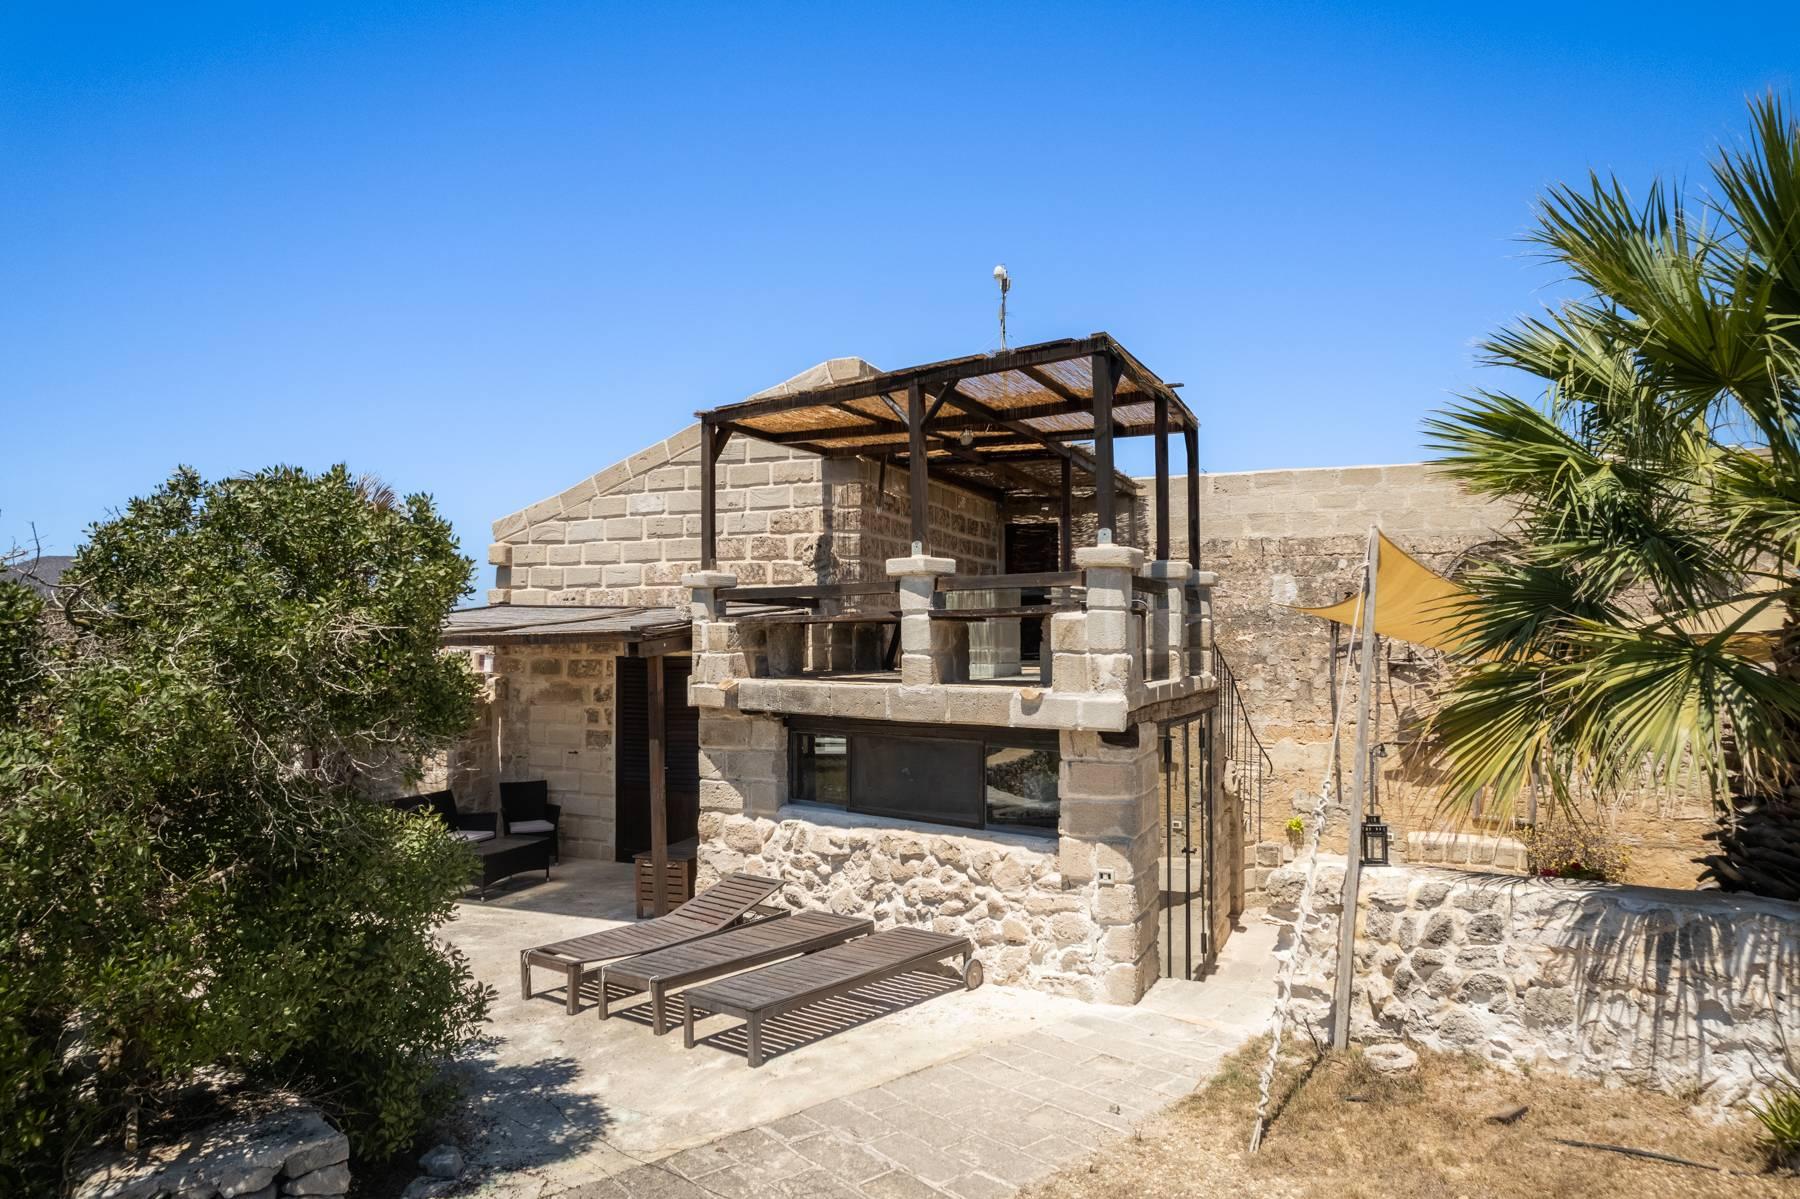 Splendid property on the island of Favignana consisting of two houses and an annex immersed in a typical garden with Mediterranean scrub and fruit trees and a stone's throw from Cala San Nicola - 53